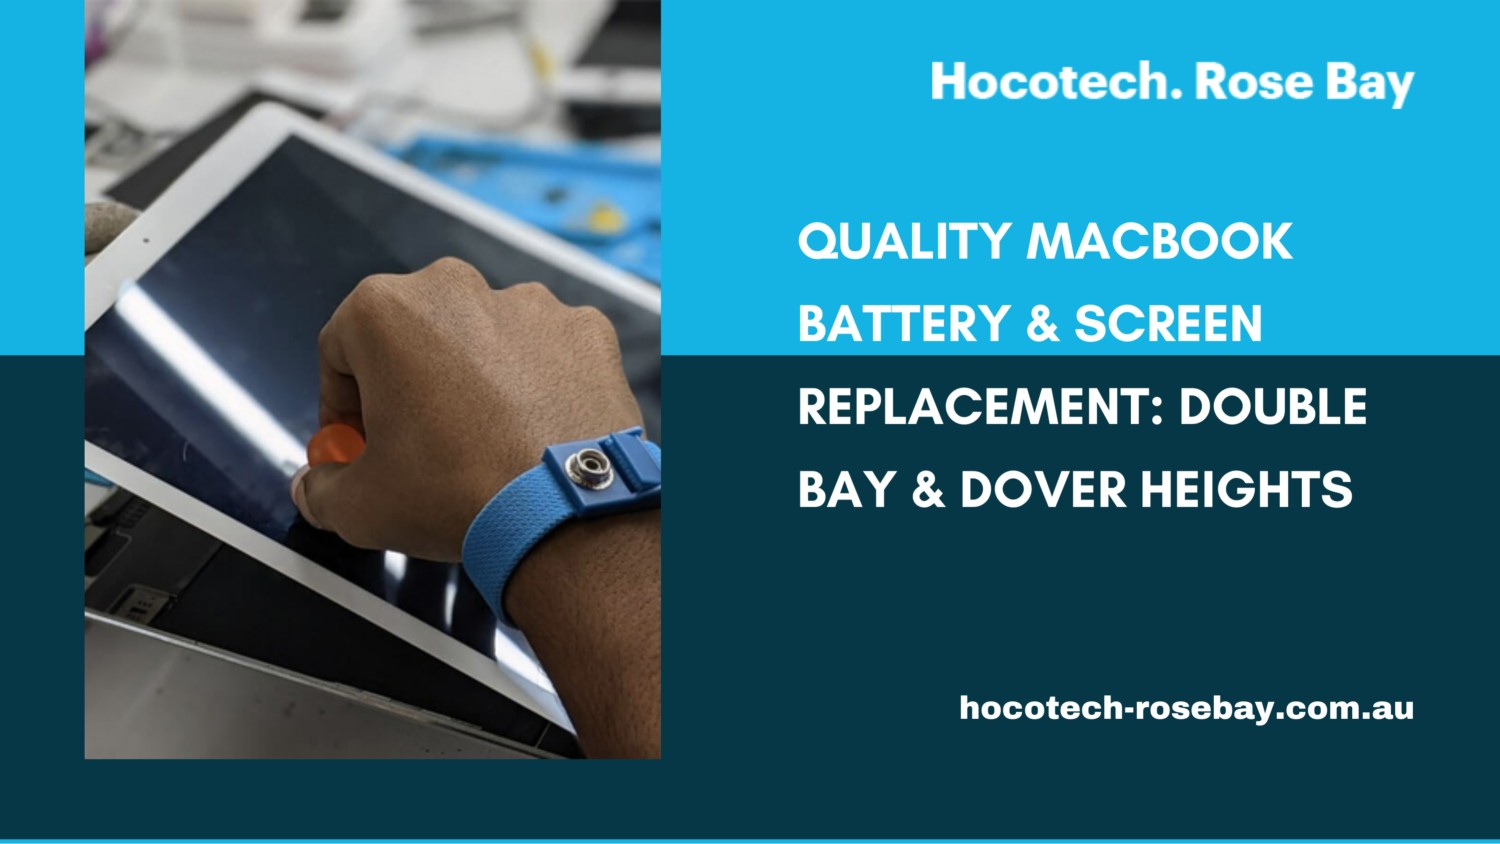 Quality Macbook Battery & Screen Replacement: Double Bay & Dover Heights